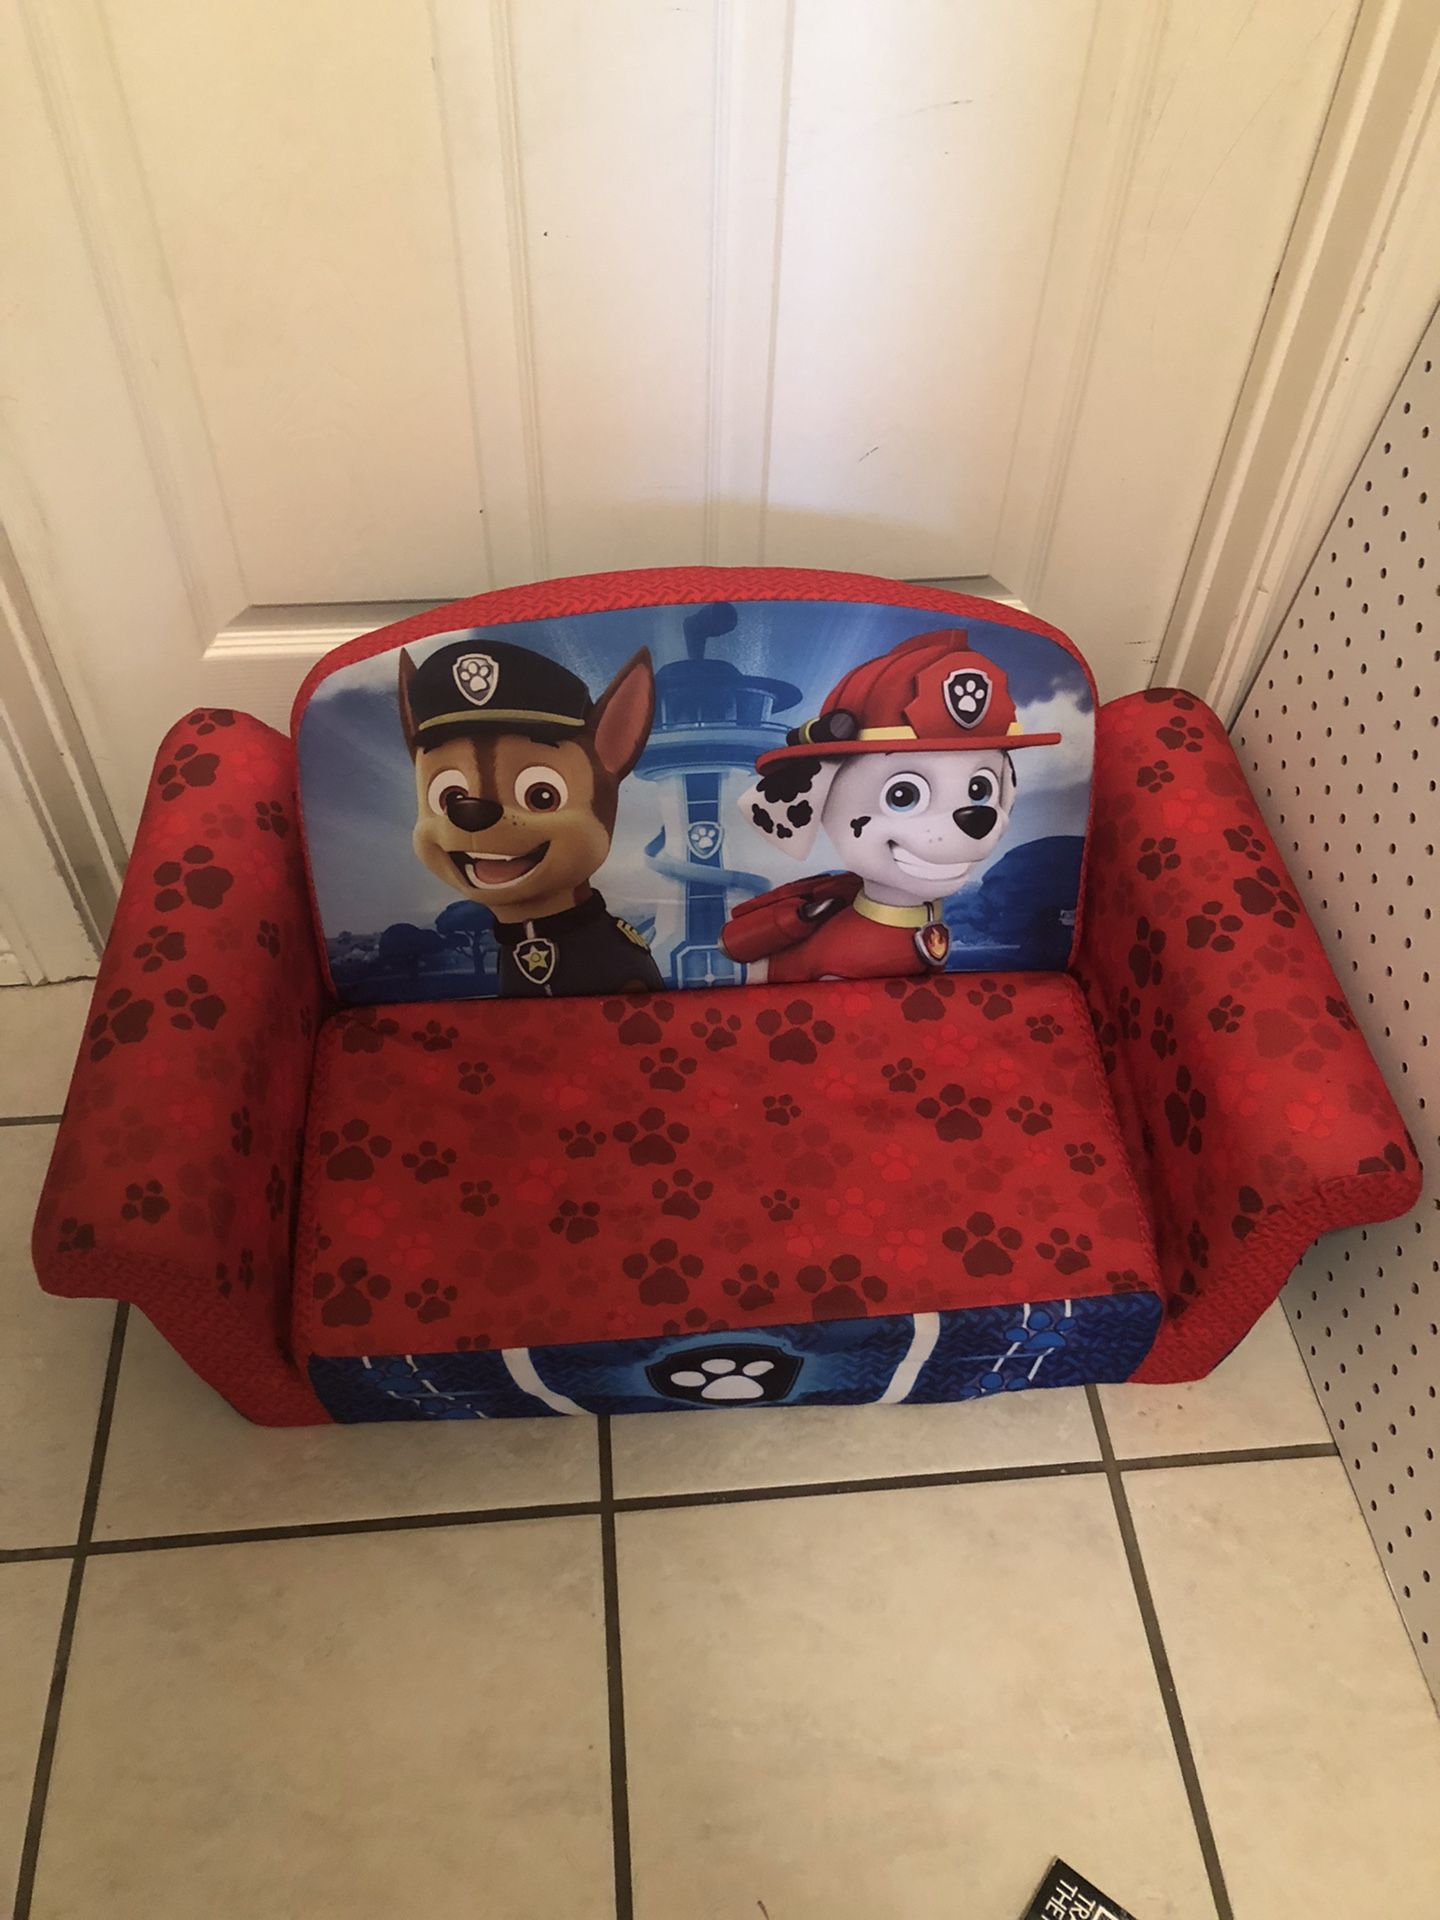 Paw Patrol 2-in-1 Flip Out Couch Sofa